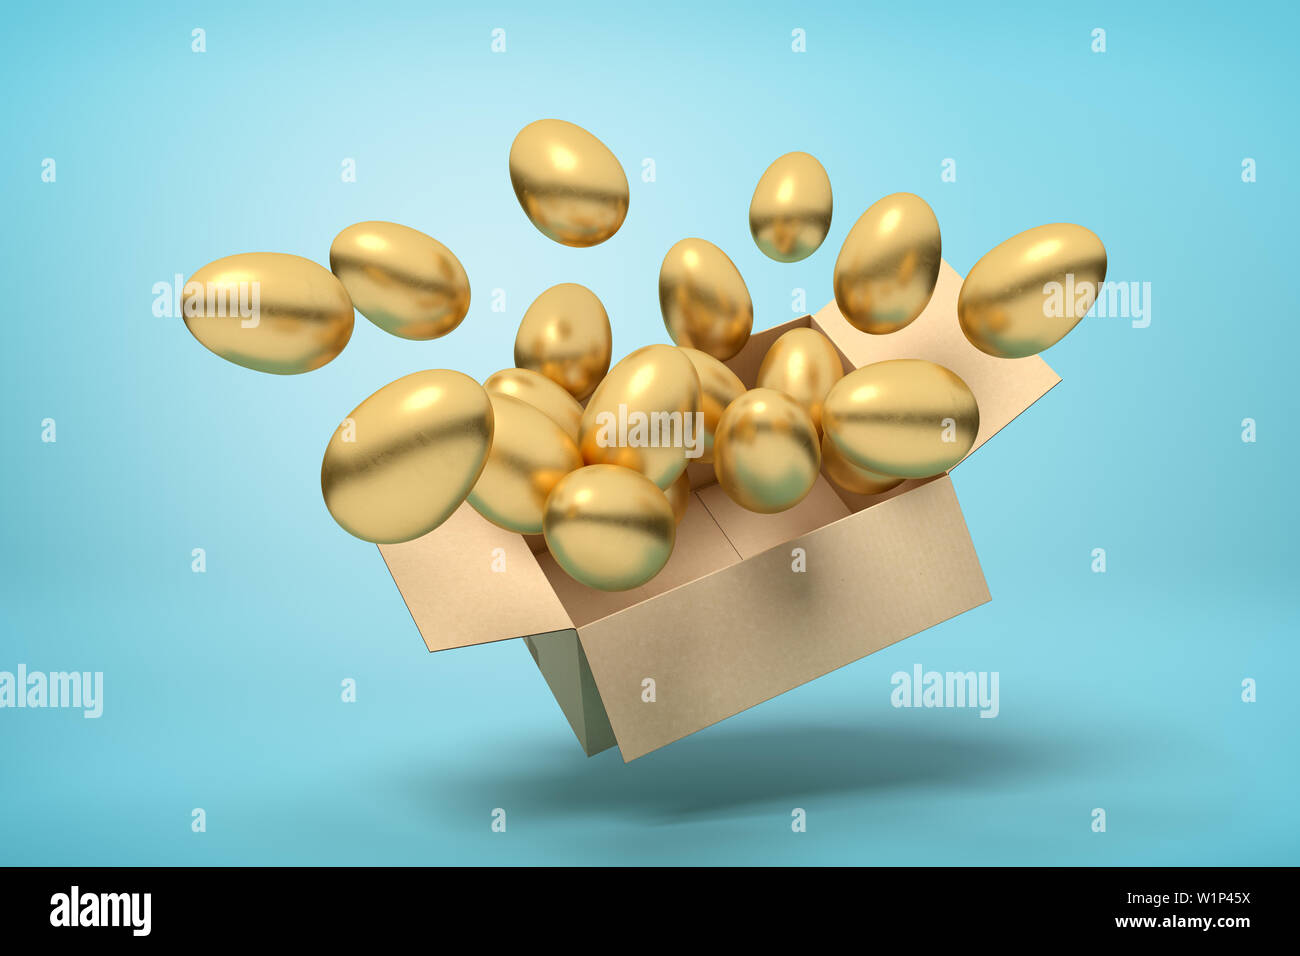 3d rendering of cardboard box full of golden eggs in mid-air on light-blue background. Stock Photo